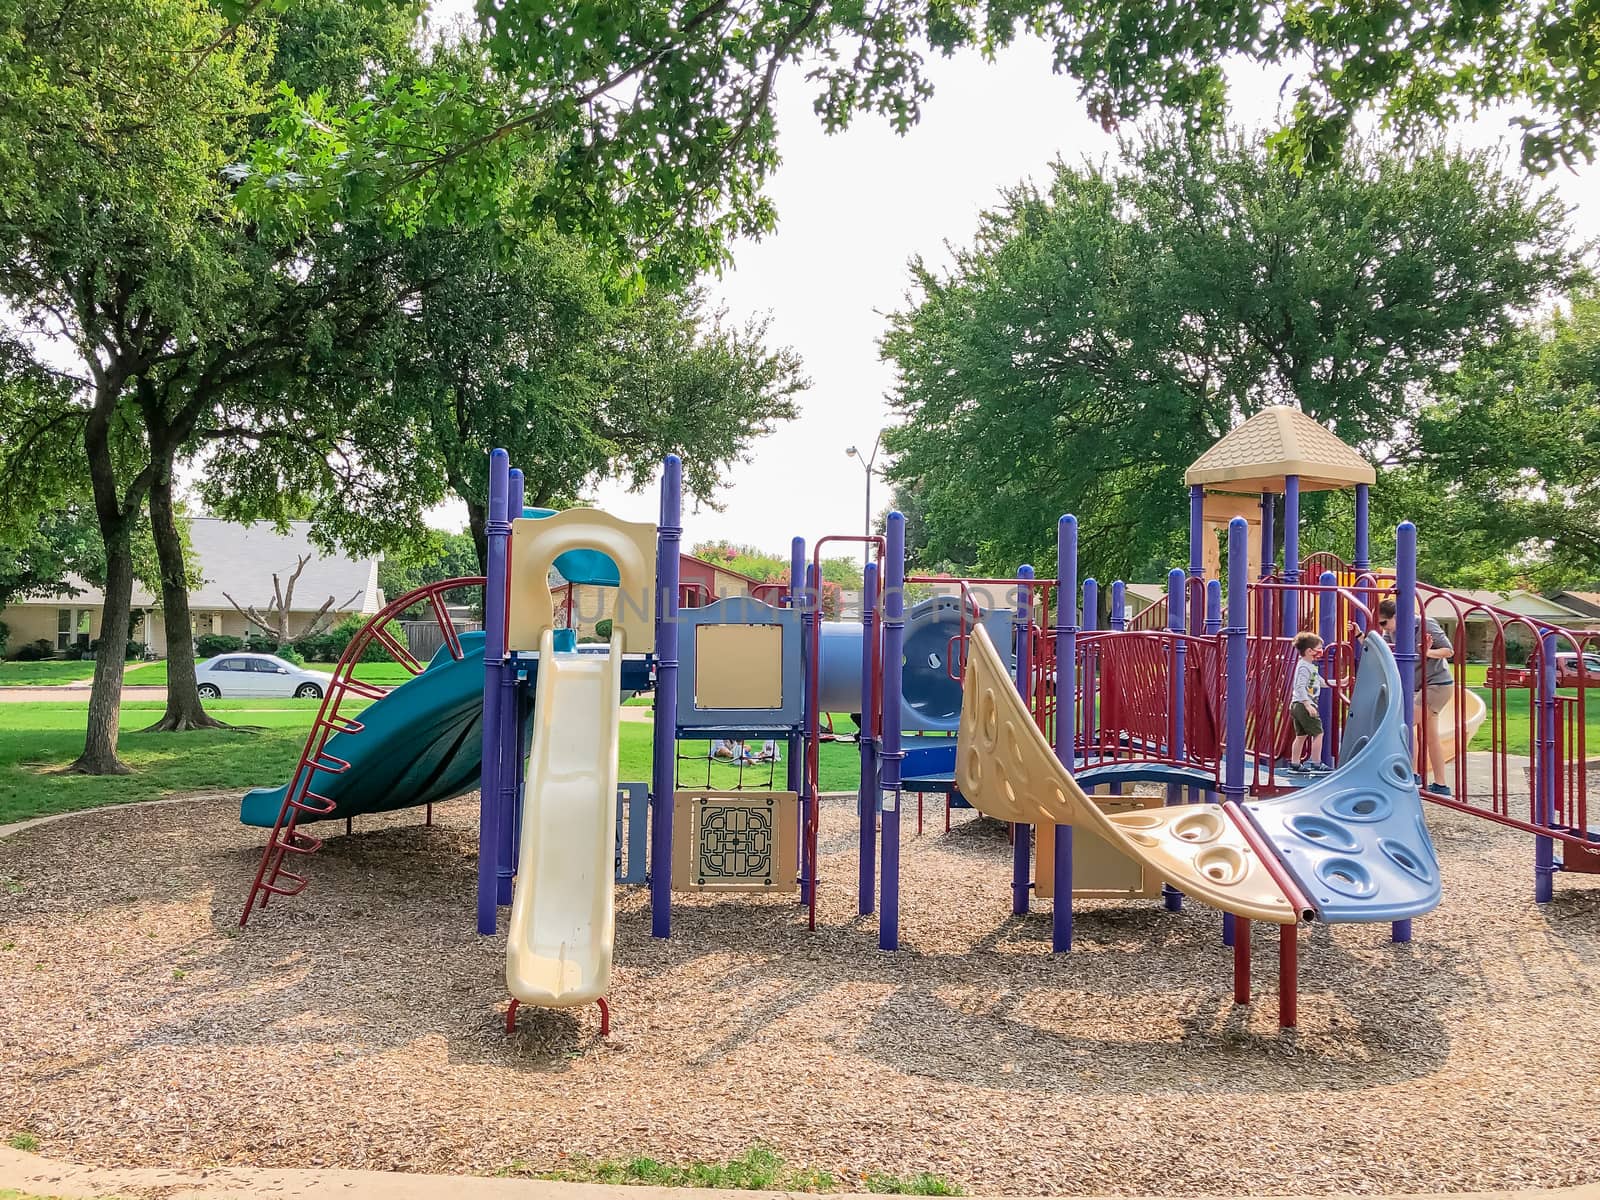 Variety of slide and swing at Colorful playground near residential neighborhood in Richardson, Texas, America. Community facility surrounded by large oak trees and green grass lawn